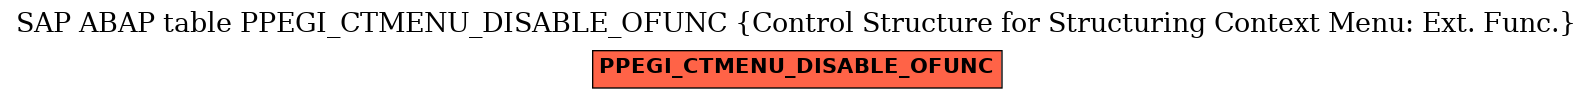 E-R Diagram for table PPEGI_CTMENU_DISABLE_OFUNC (Control Structure for Structuring Context Menu: Ext. Func.)